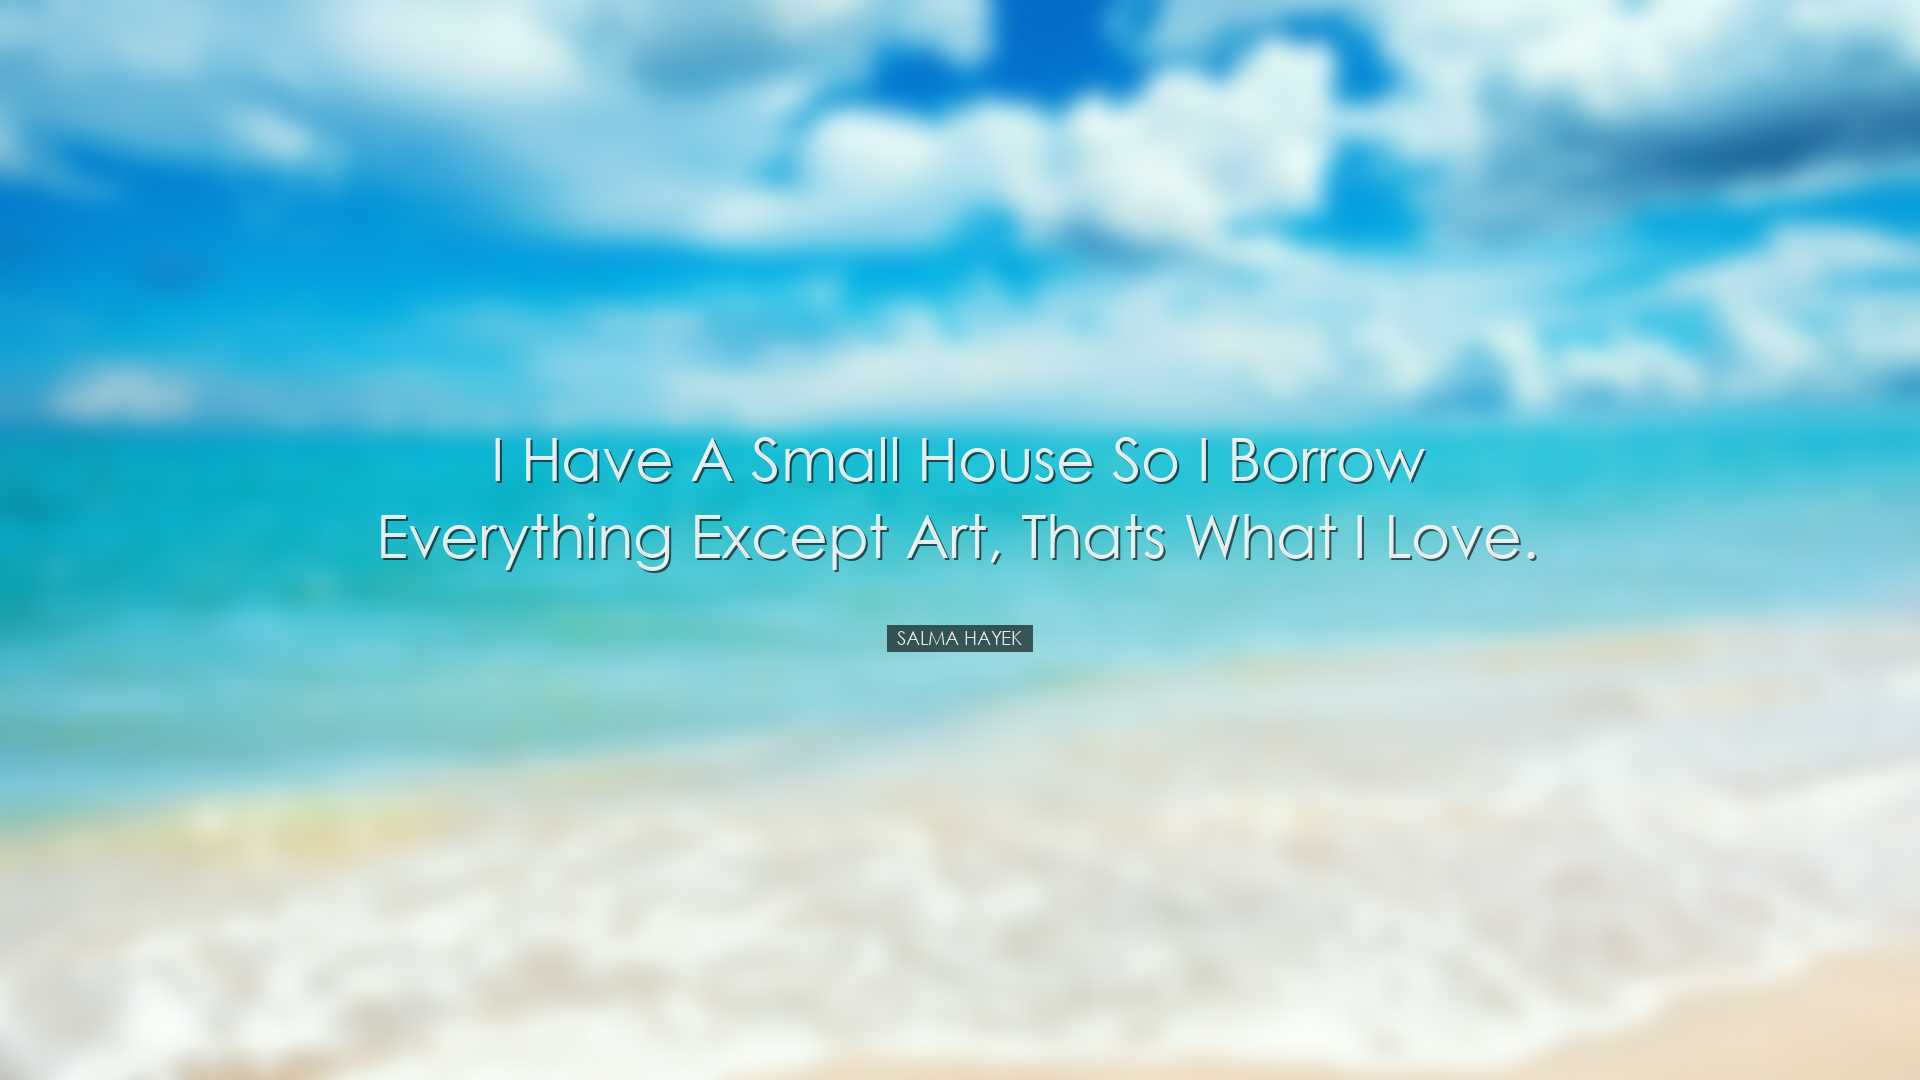 I have a small house so I borrow everything except art, thats what